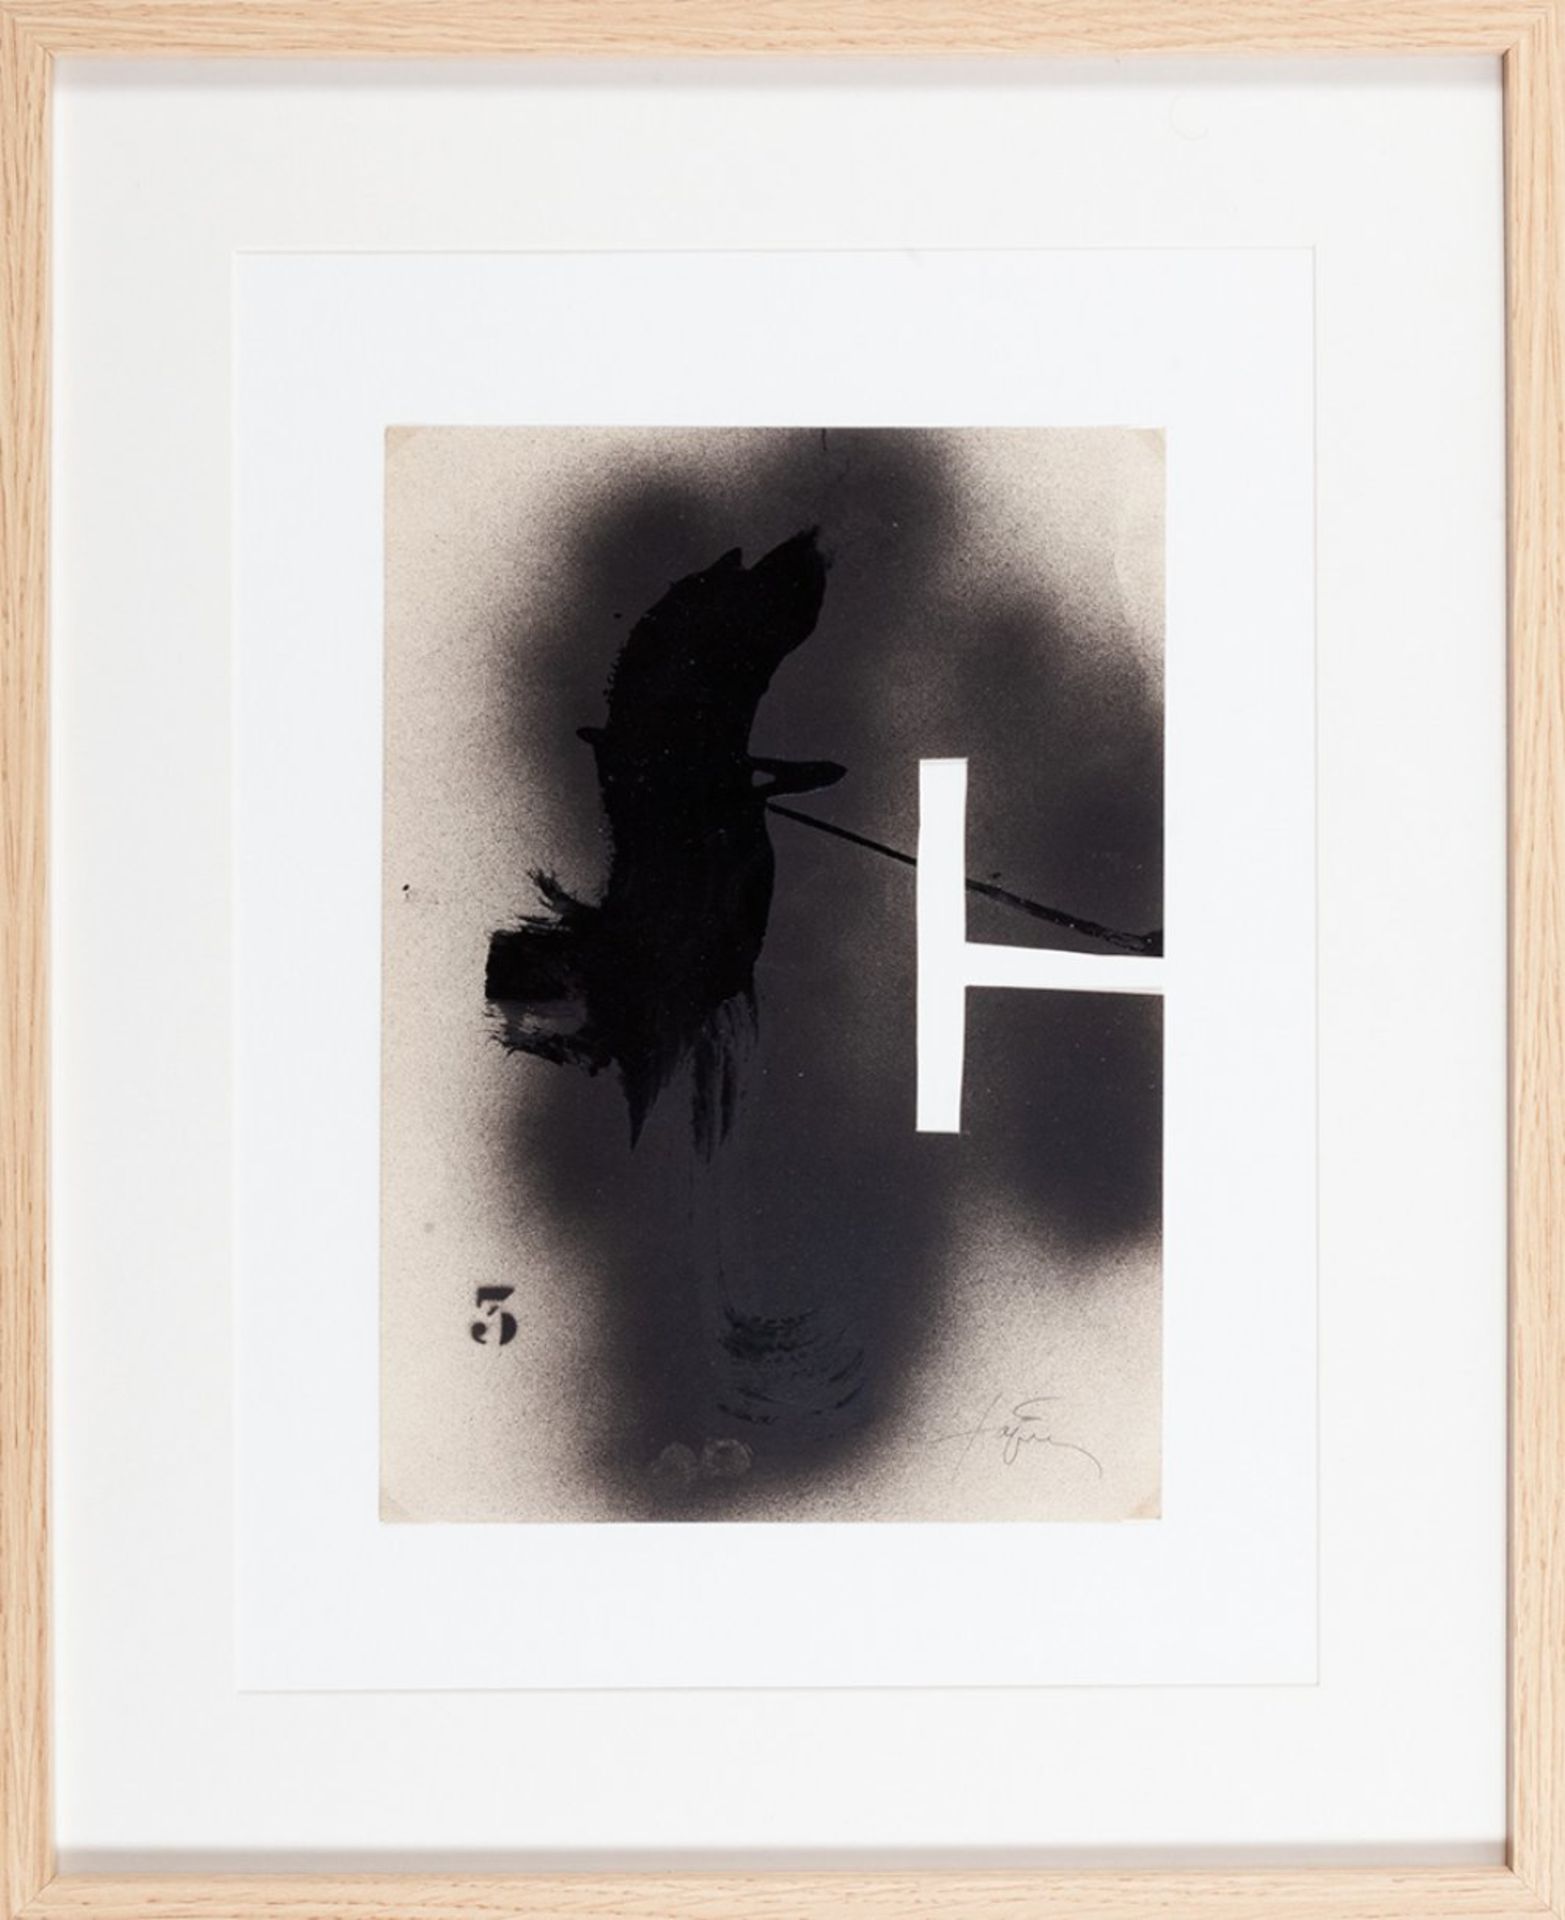 ANTONI TÀPIES PUIG (Barcelona, 1923 - 2012).Untitled, ca. 1979.Mixed media on paper.Signed in the - Image 2 of 4